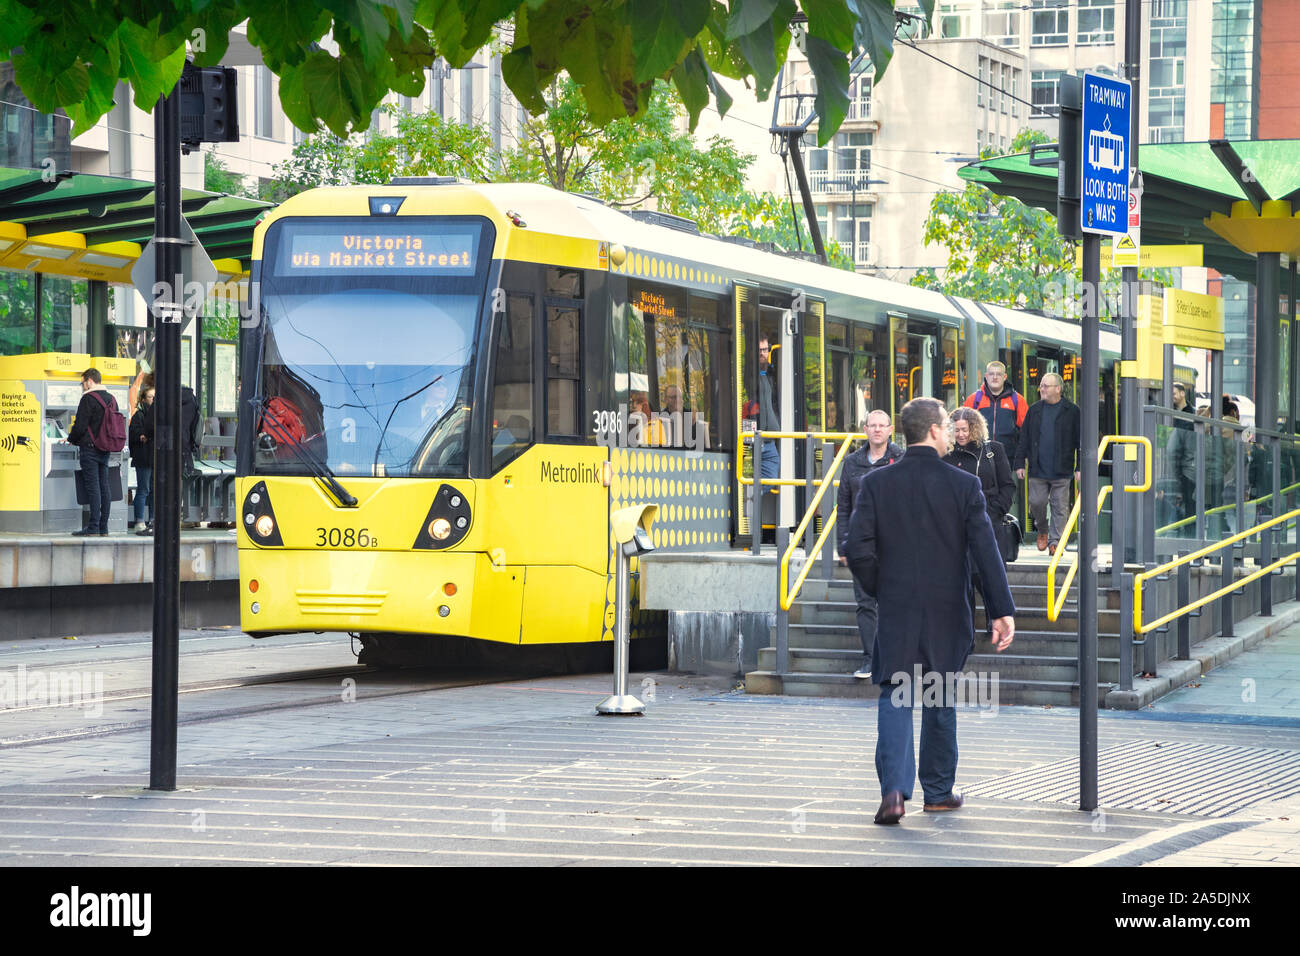 2 November 2018: Manchester, UK - Metrolink tram at tram stop in St Peter's Square in the CBD, people getting on and off. Stock Photo